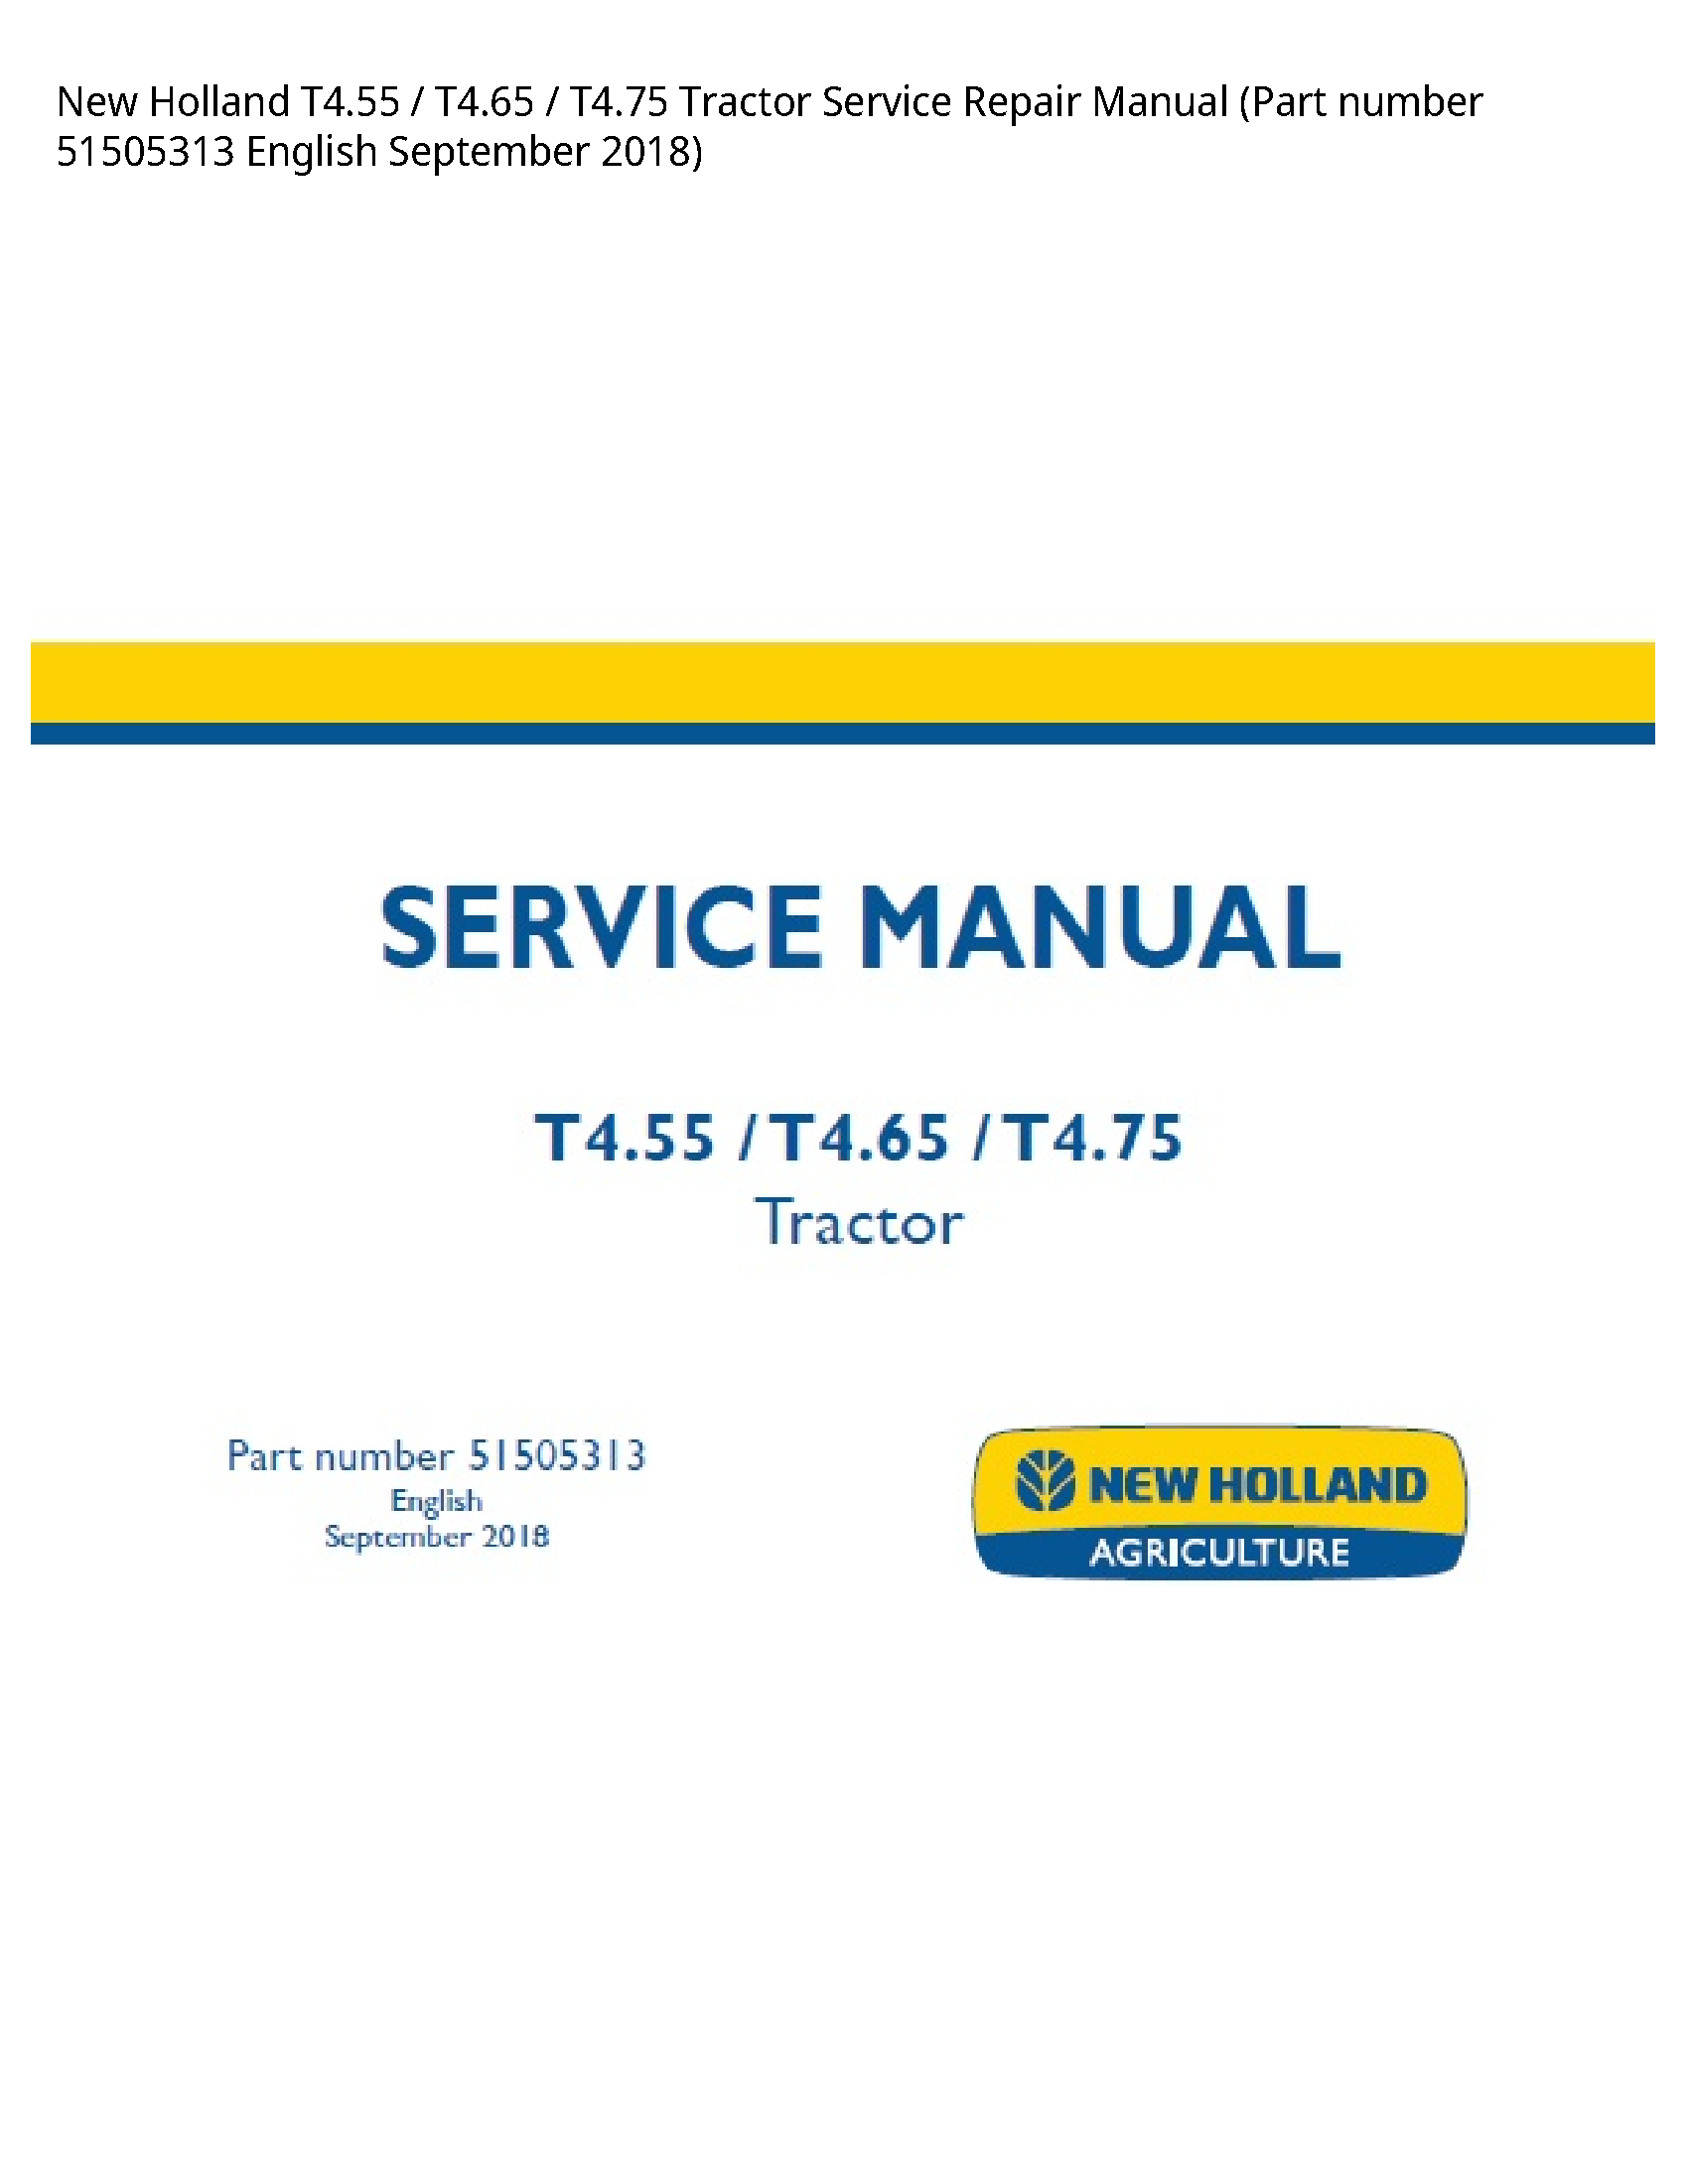 New Holland T4.55 Tractor manual